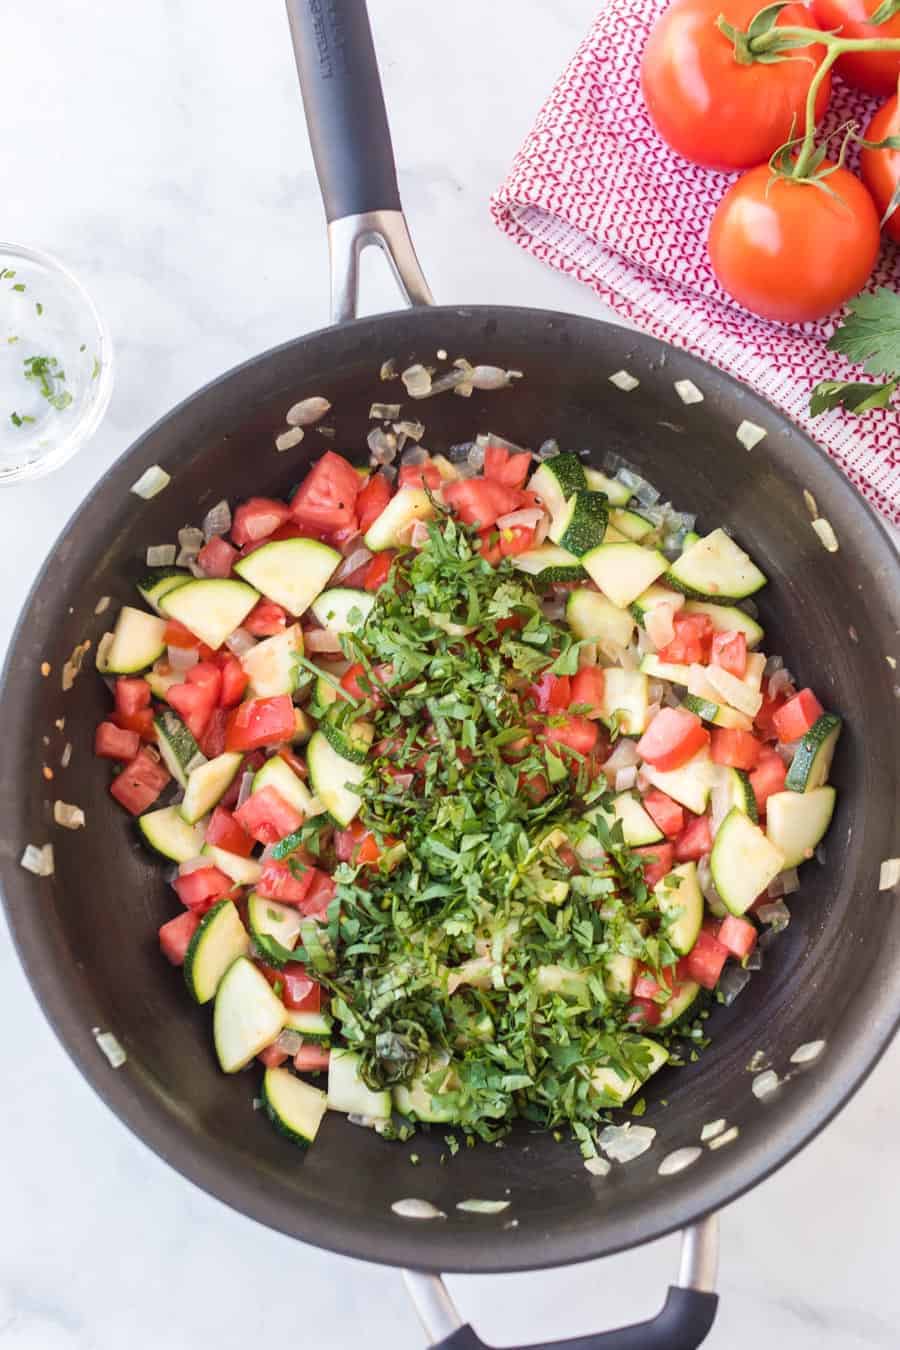 pan sautéing zucchini and tomatoes with fresh herbs.